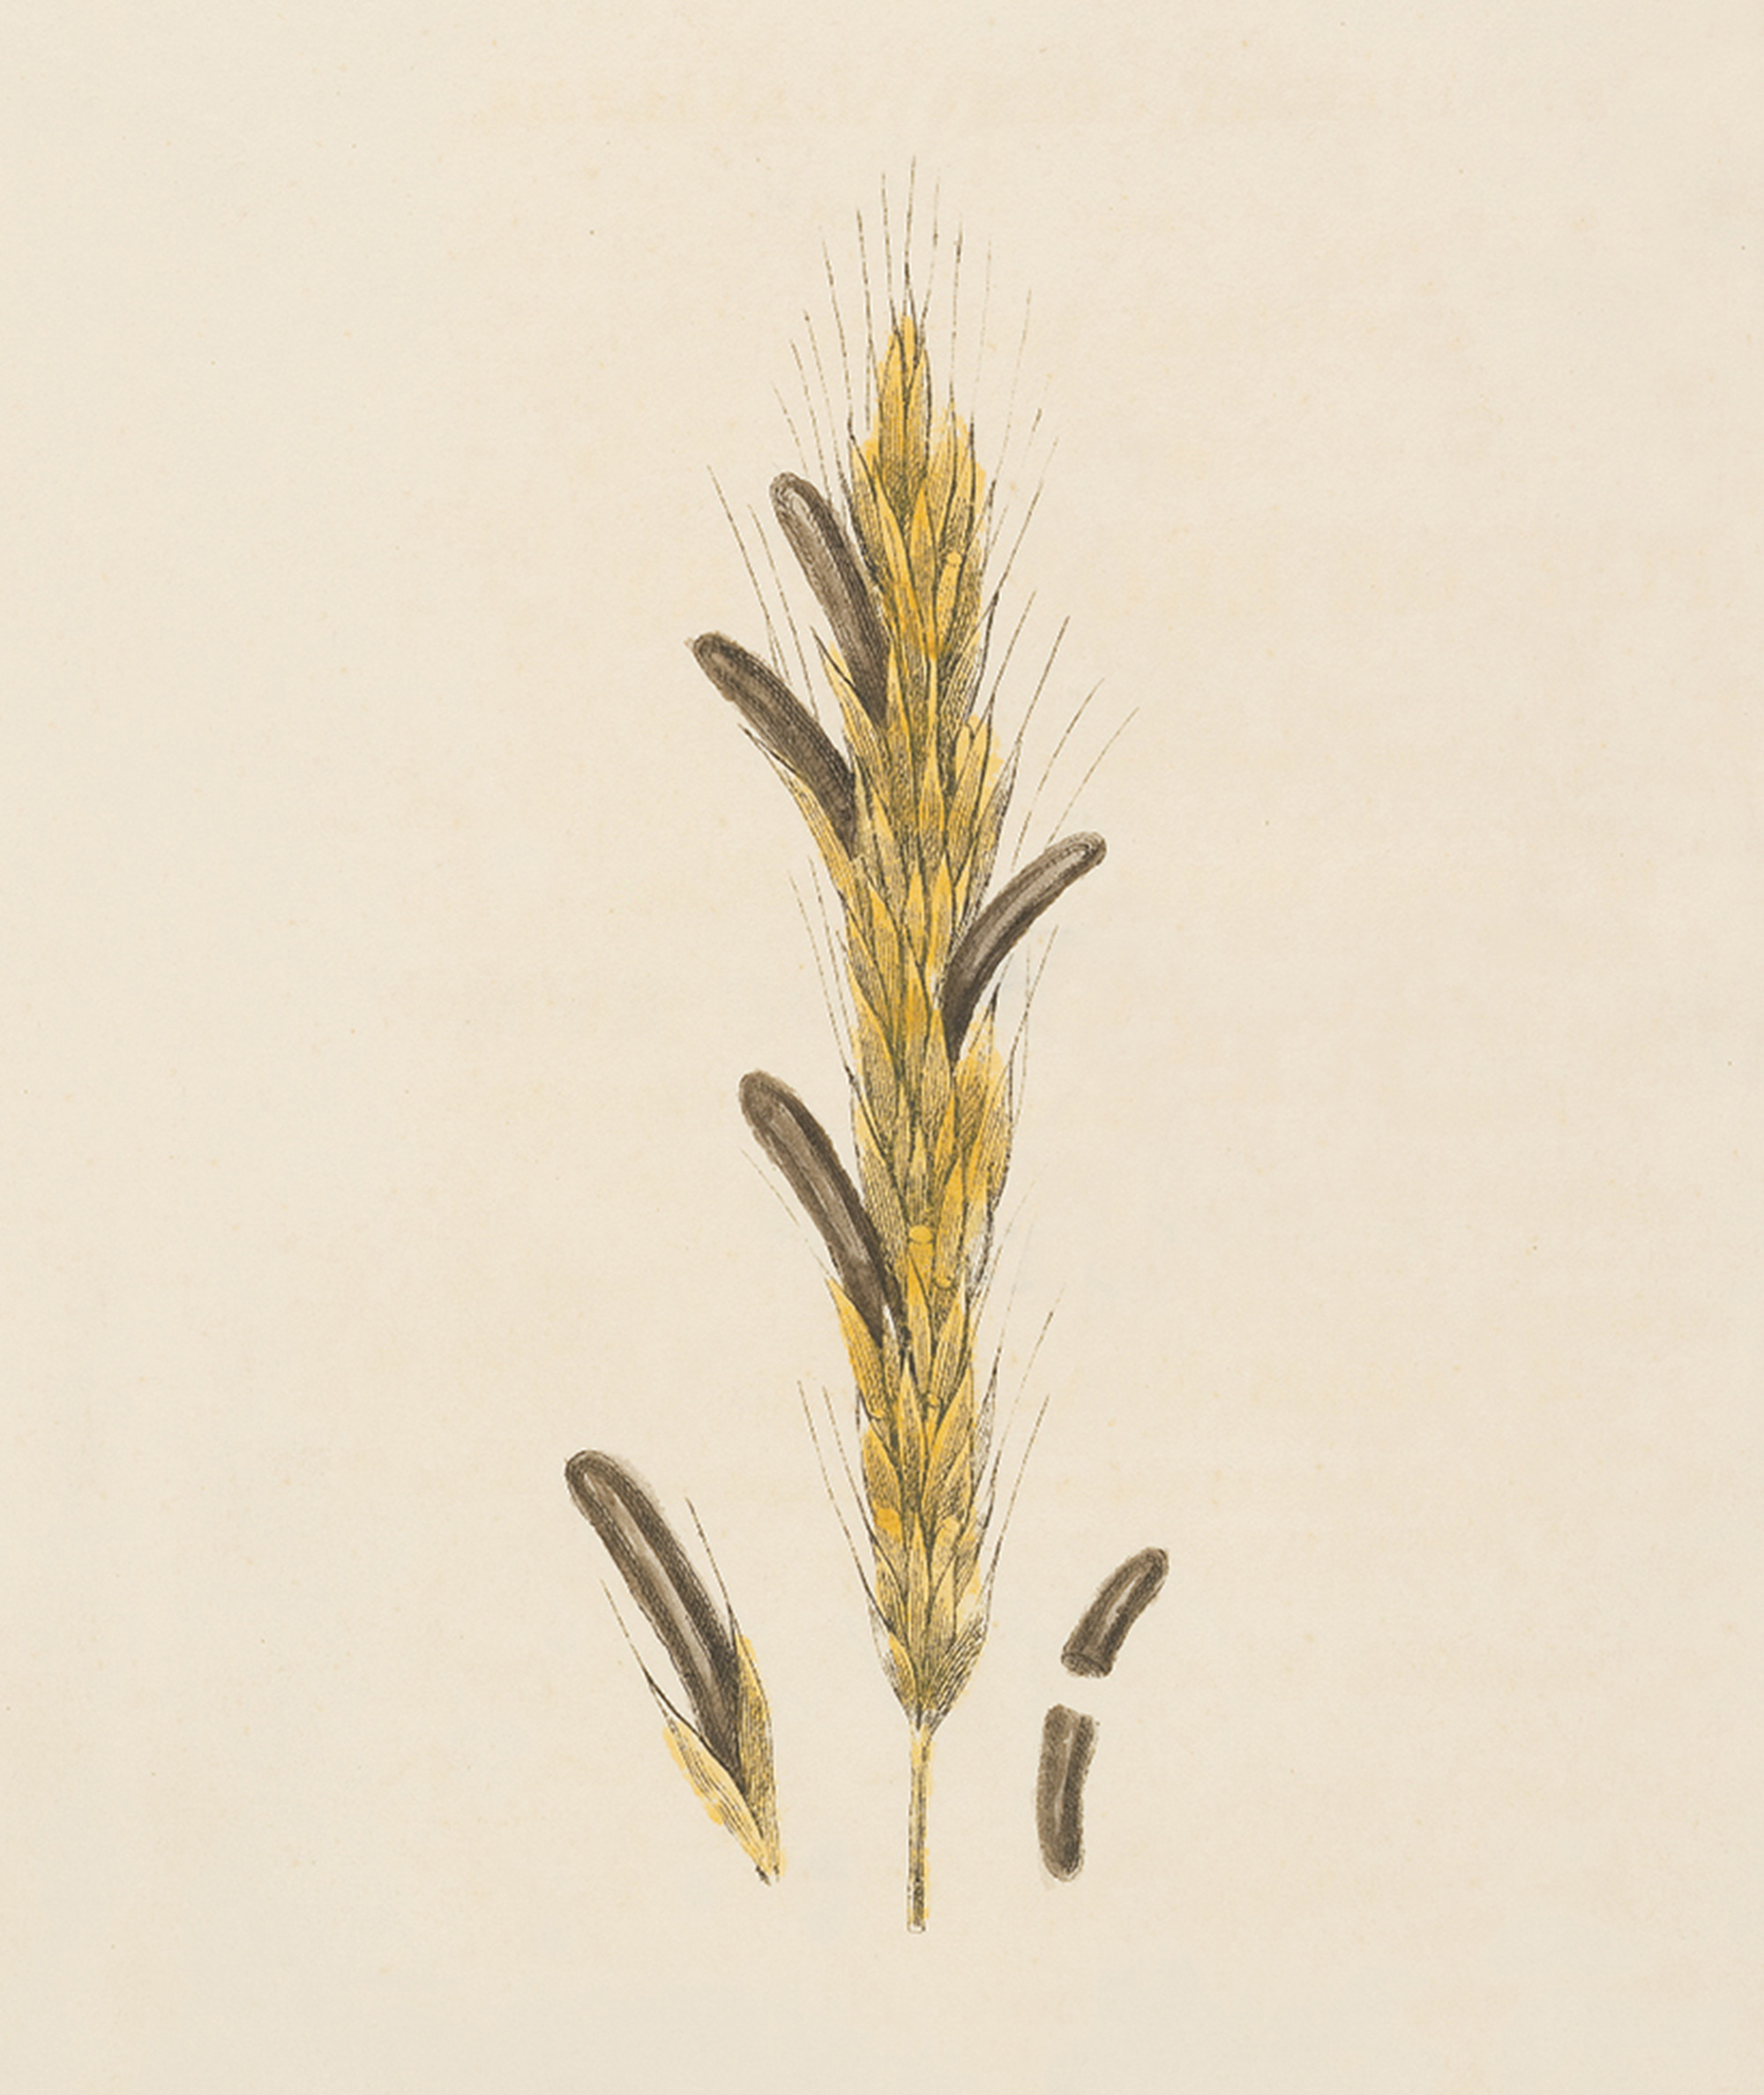 Ear of rye infected with ergot fungus. Illustration from Adam Neale, Researches Respecting the Natural History, Chemical Analysis, and Medicinal Virtues, of the Spur, or Ergot of Rye, When Administered as a Remedy in Certain States of the Uterus, 1828. Courtesy Edinburgh University Library.